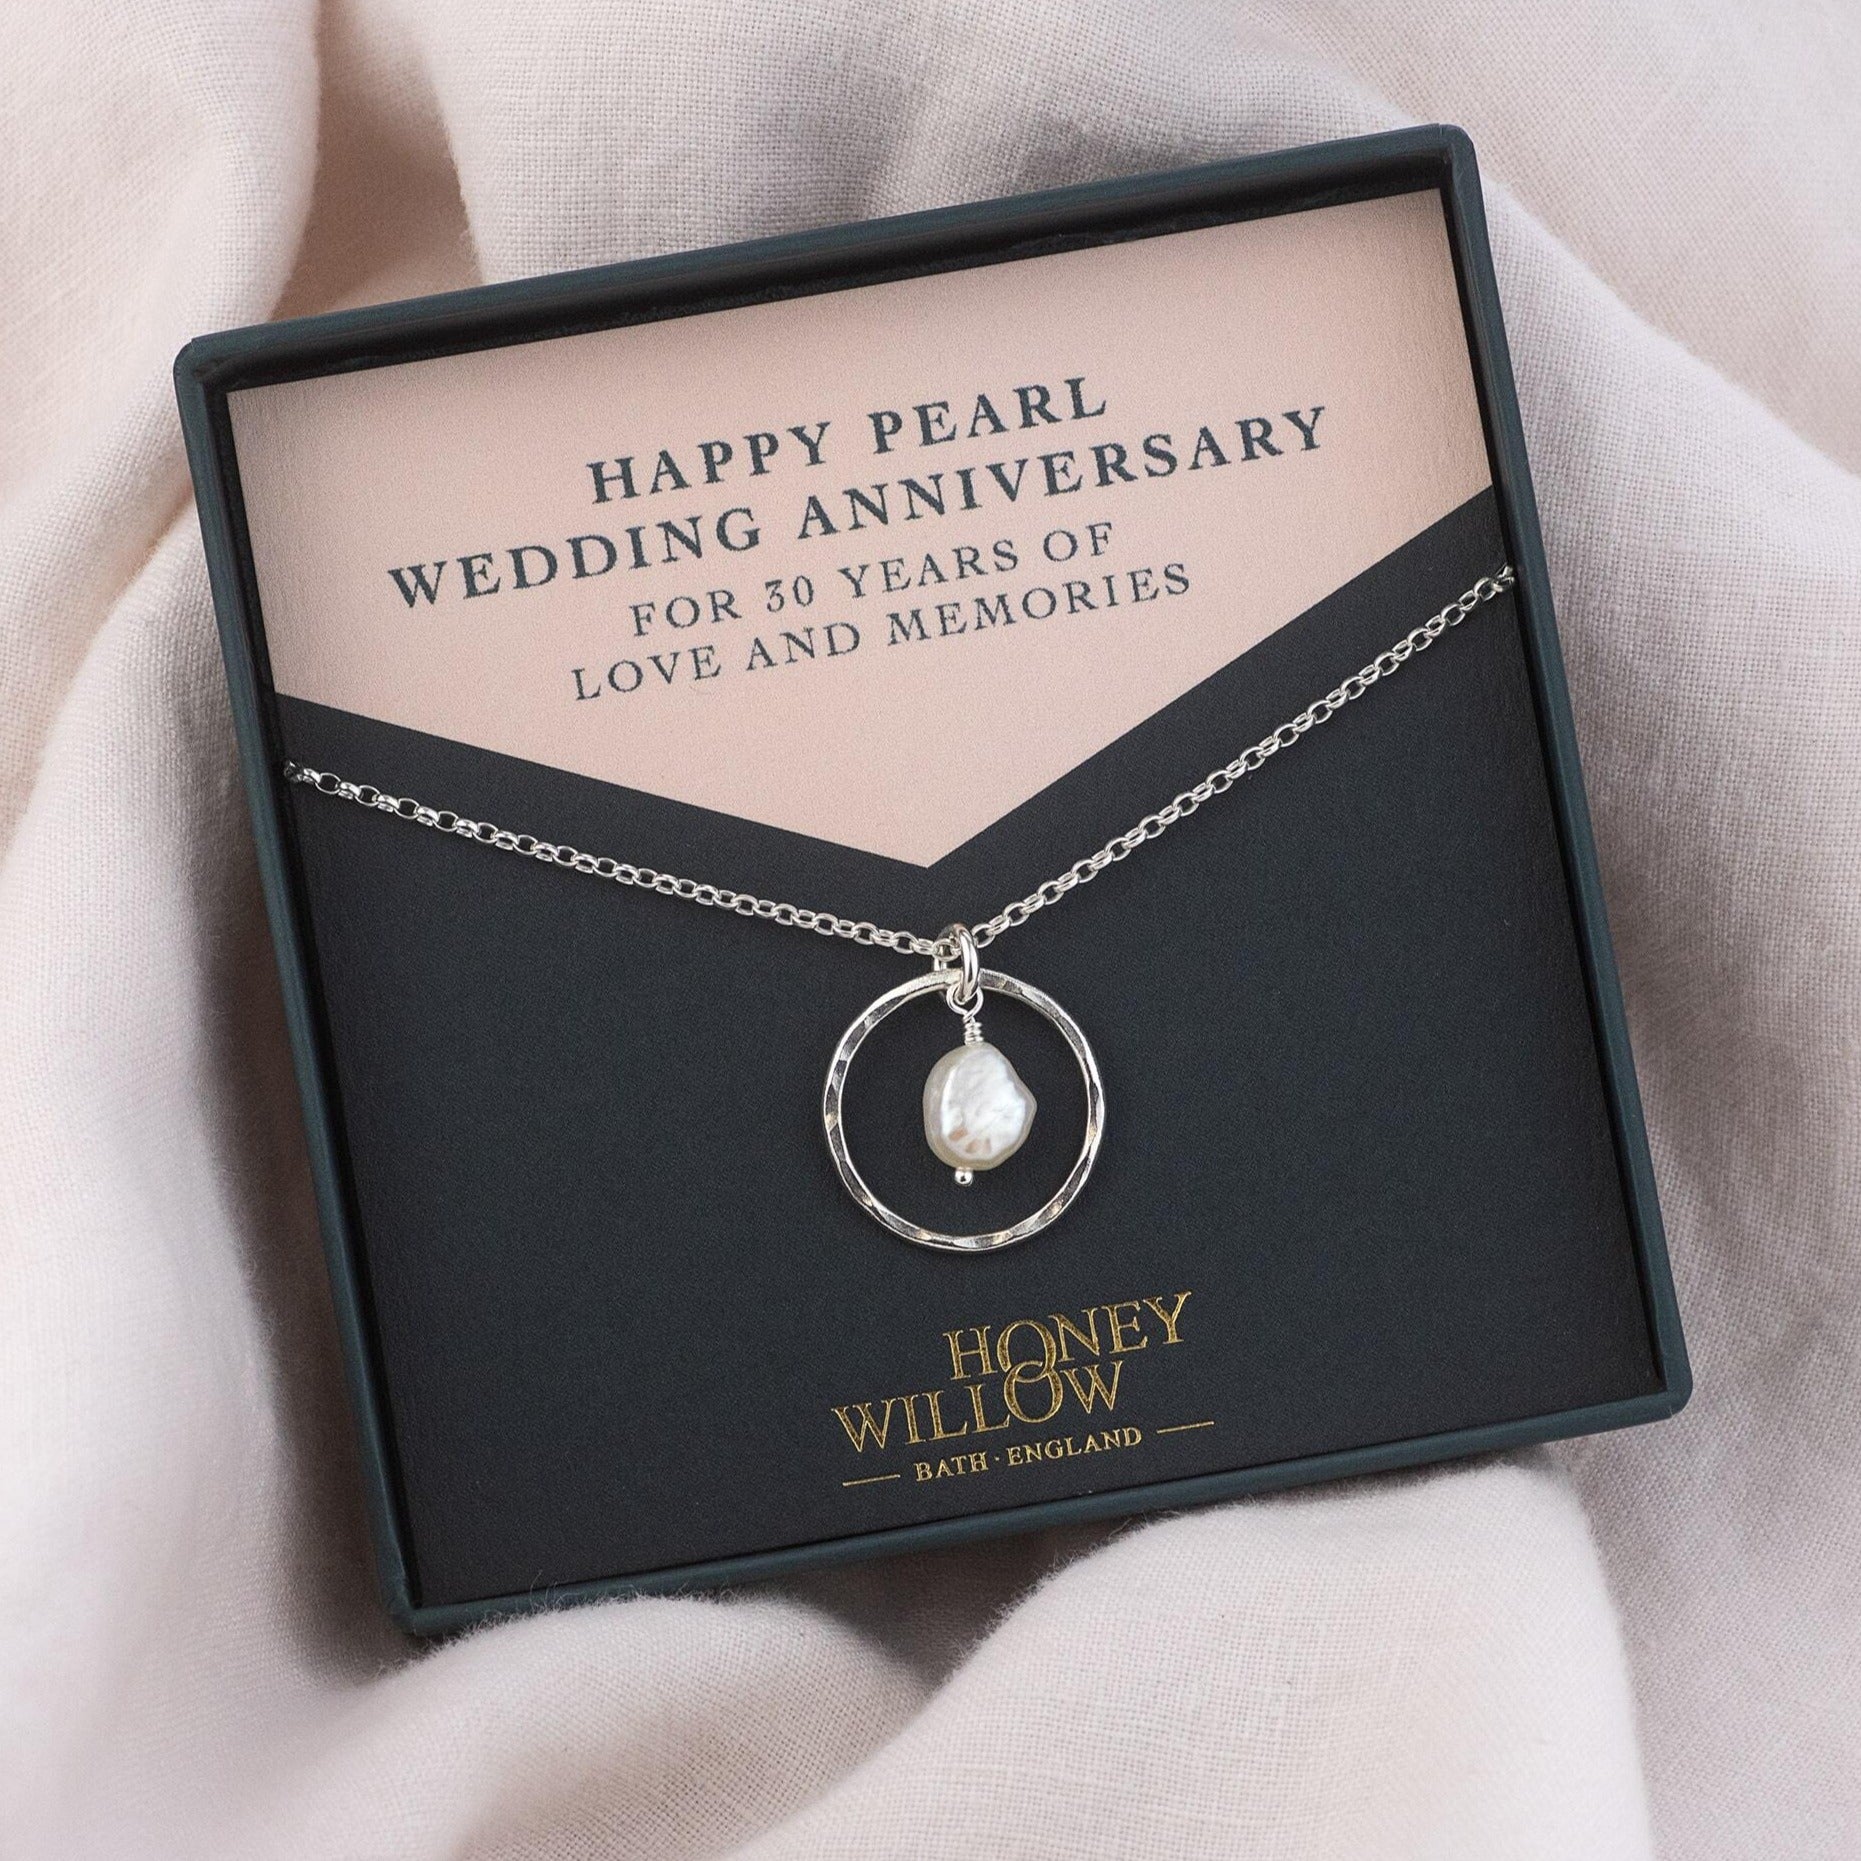 Pearl Wedding Anniversary Necklace - 30th Wedding Anniversary Gift